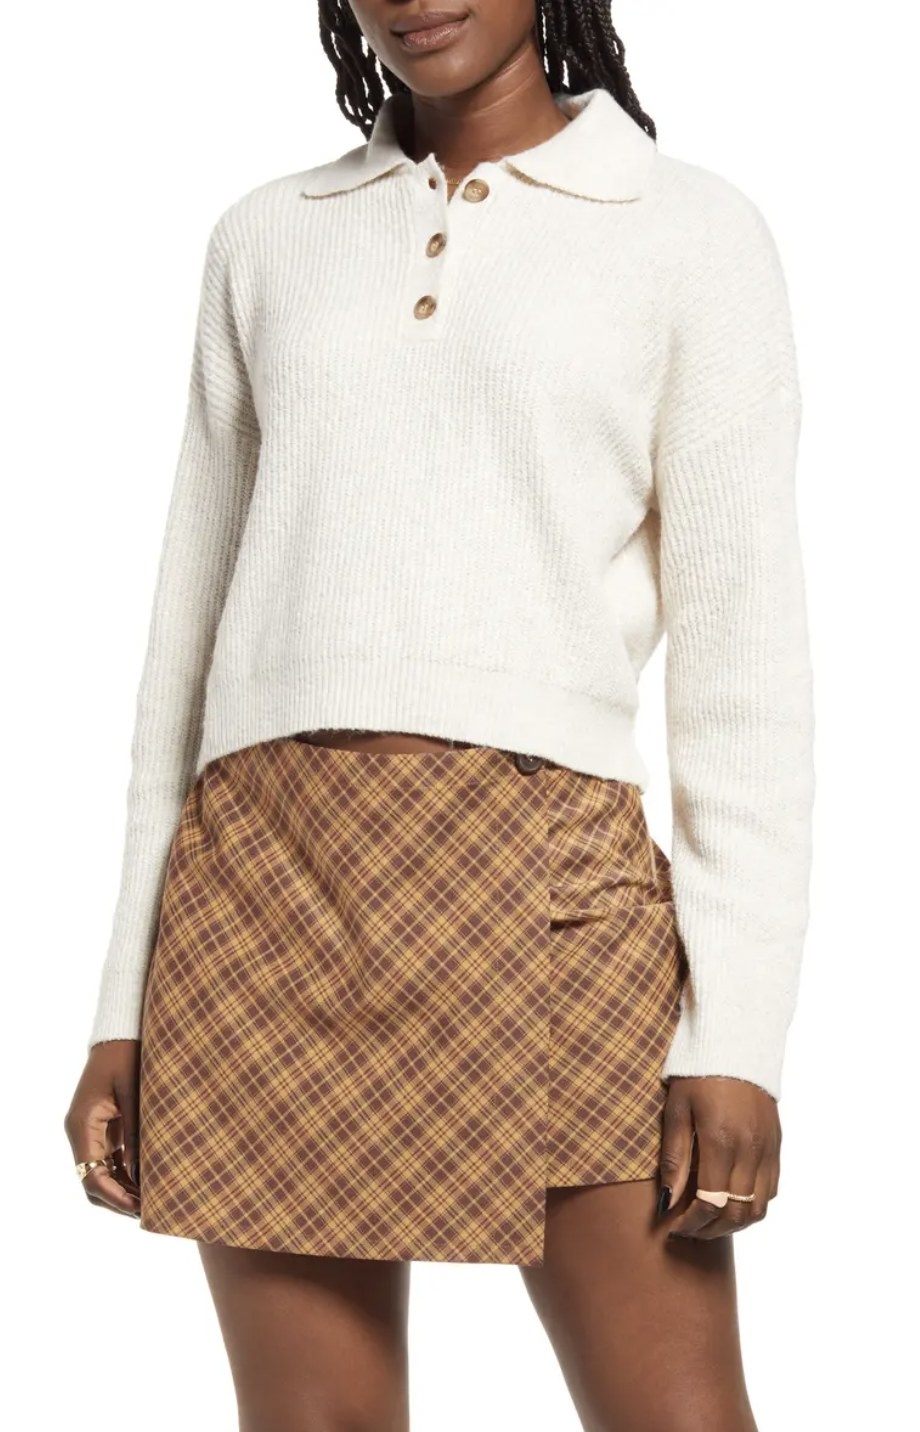 model wearing the white sweater with plaid skirt